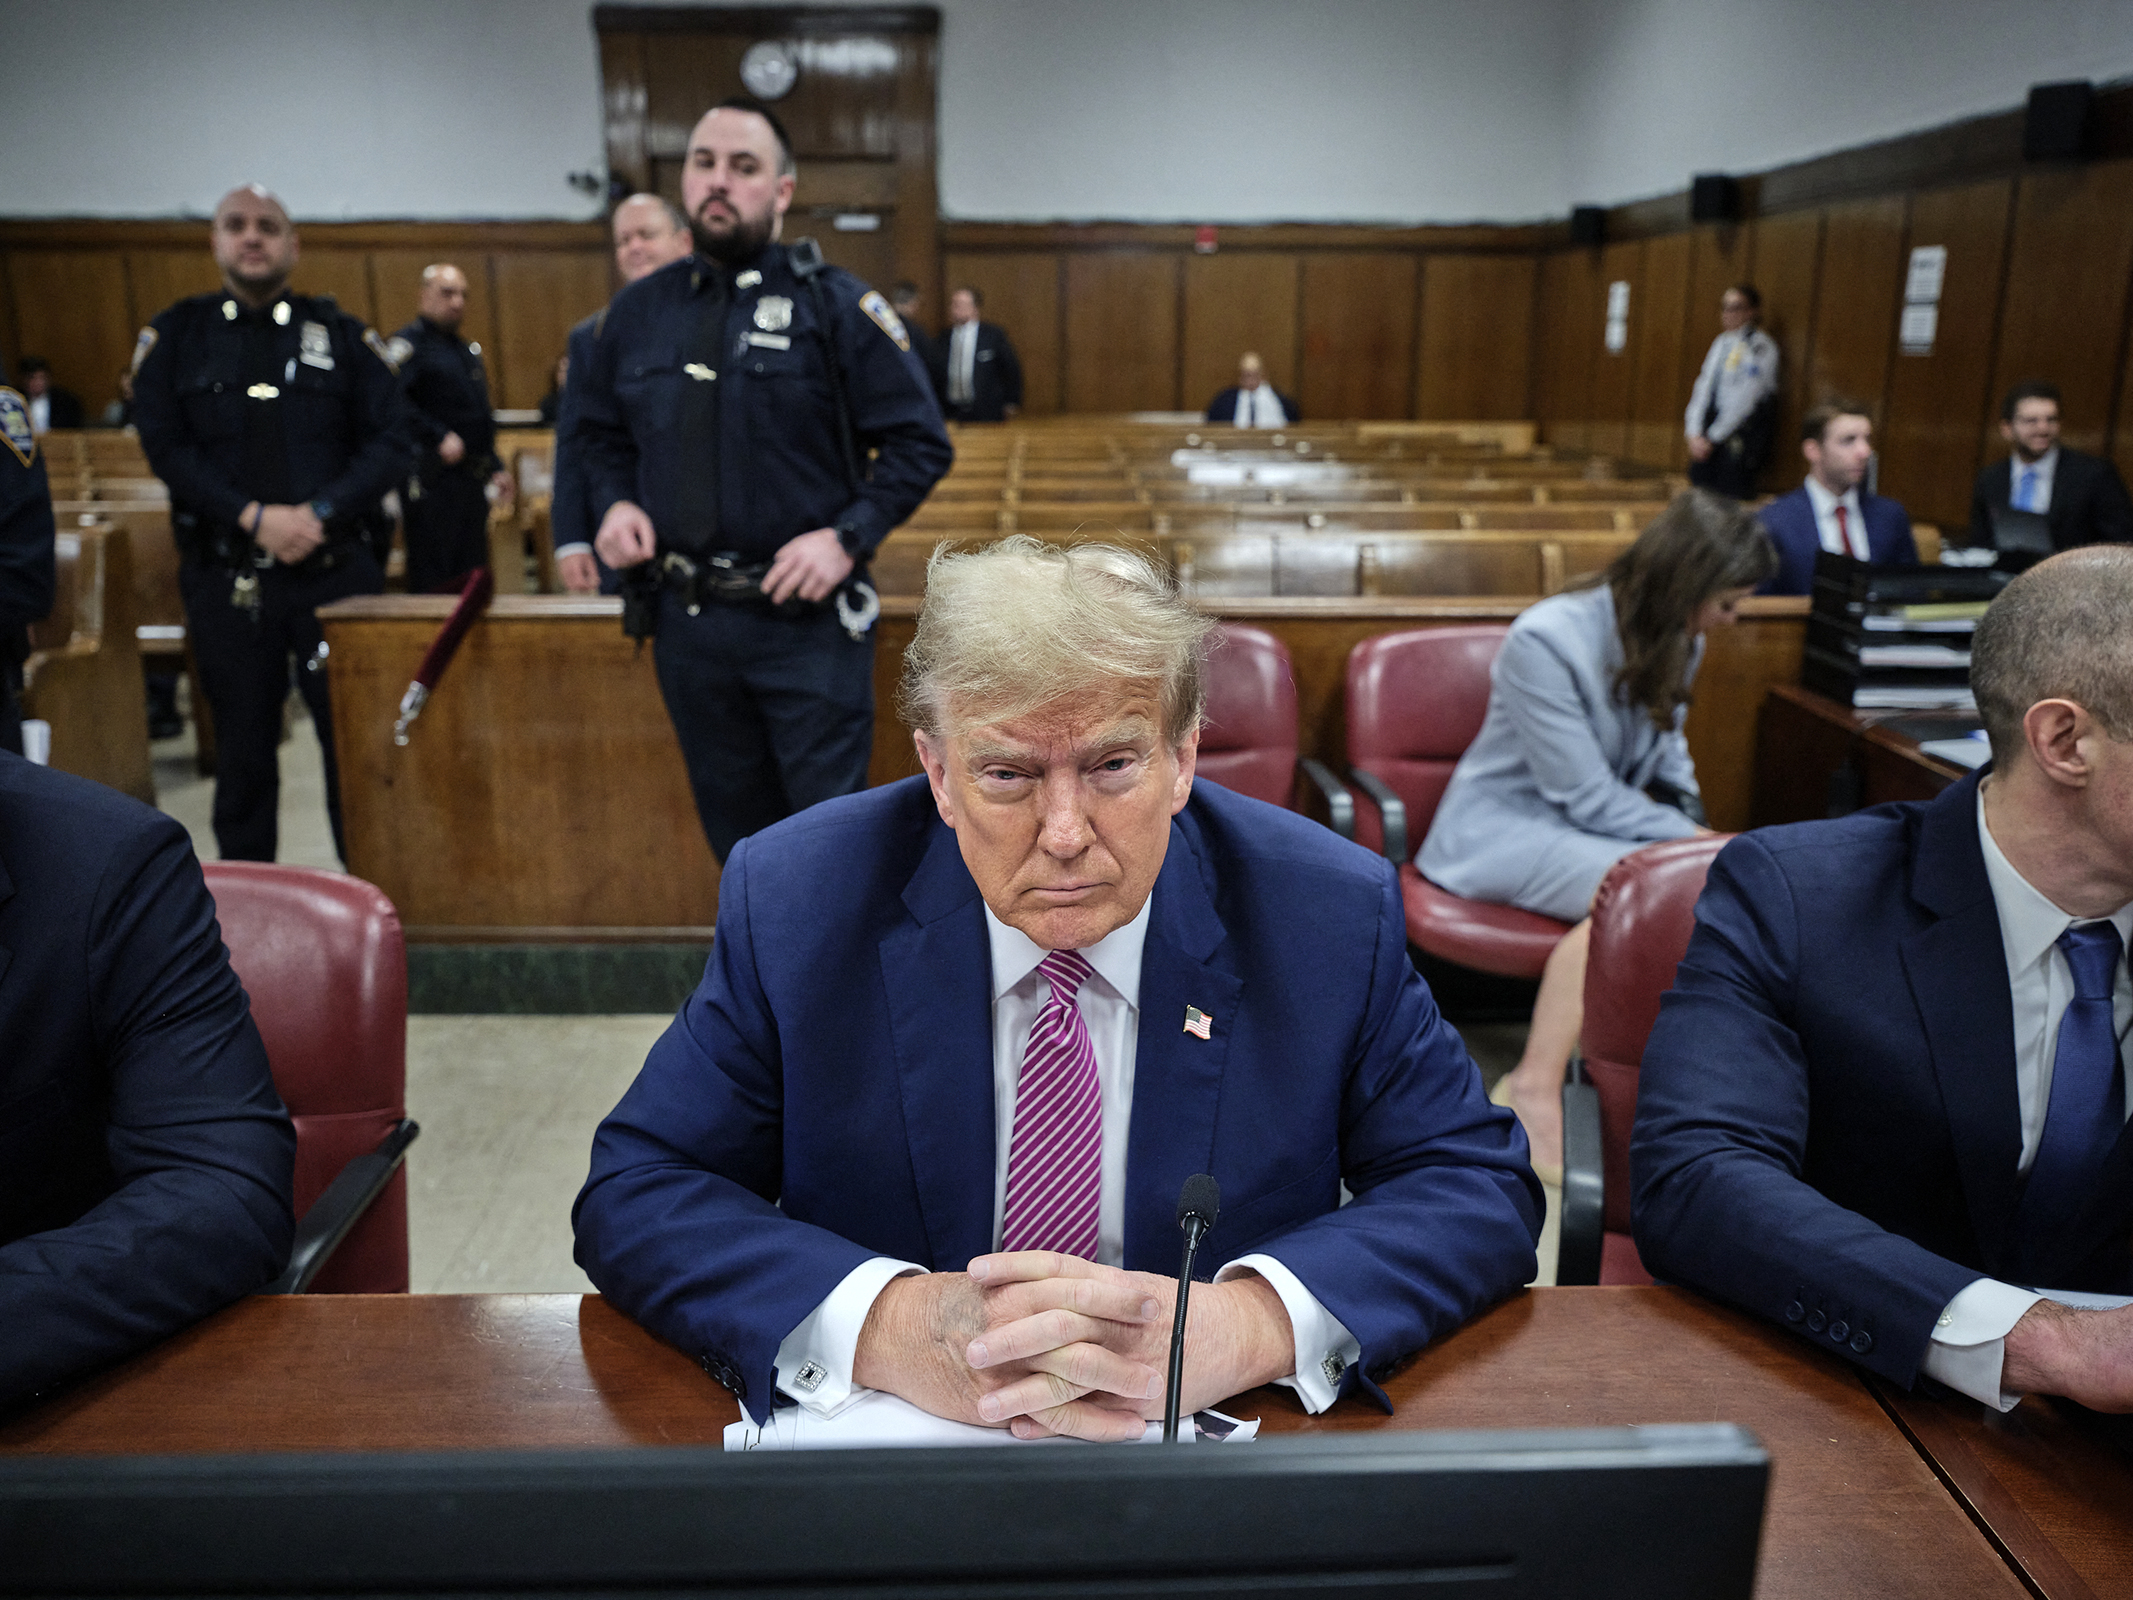 Former US President Donald Trump attends his trial for allegedly covering up hush money payments linked to extramarital affairs, at Manhattan Criminal Court in New York City on April 19. 